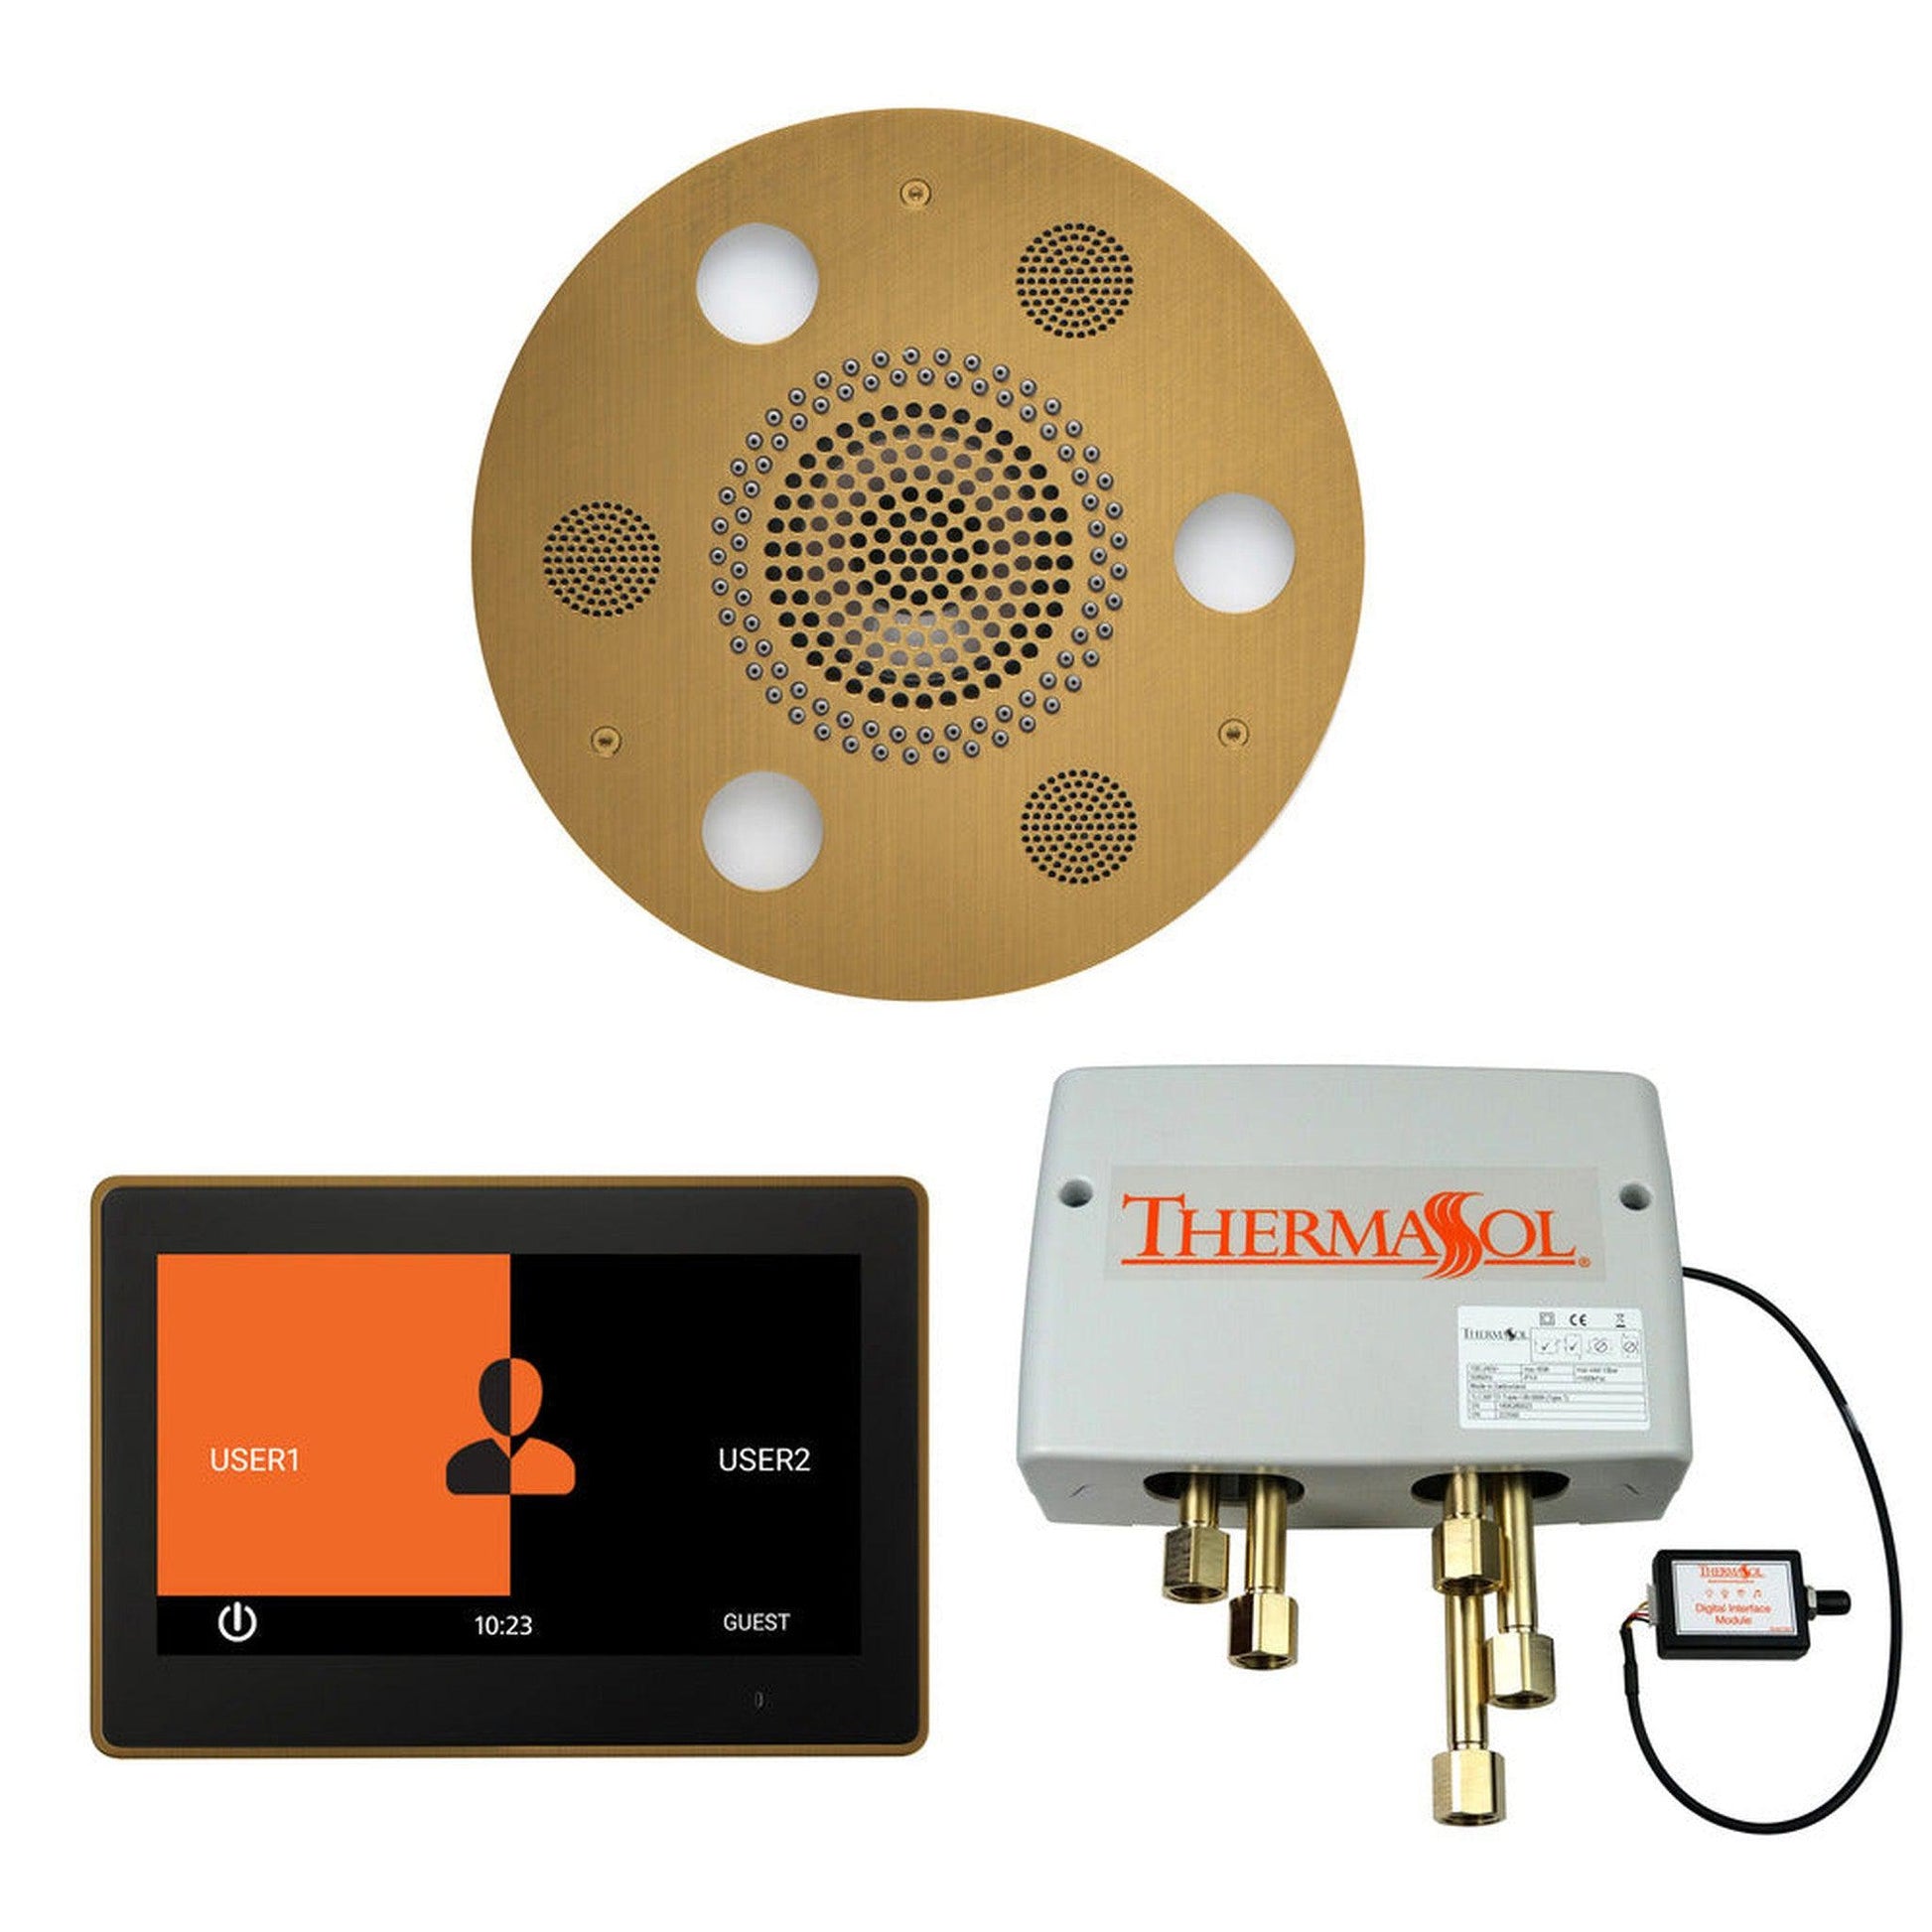 ThermaSol The Wellness Antique Brass Finish Serenity Advancedd Round Shower Package with 10" ThermaTouch